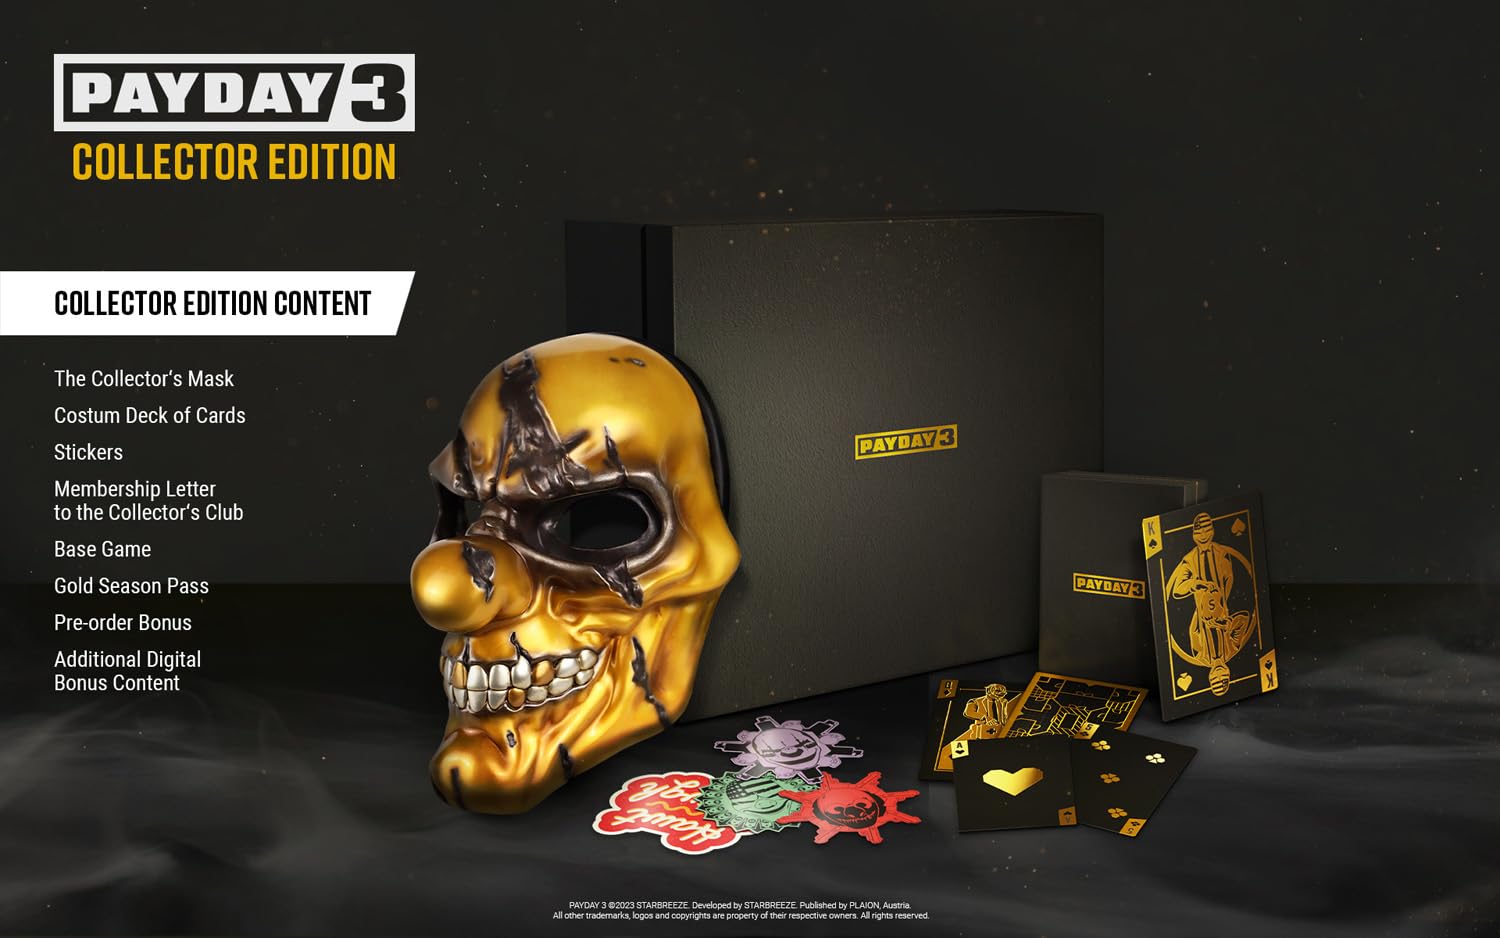 PAYDAY 3 - Diese Collector's Edition